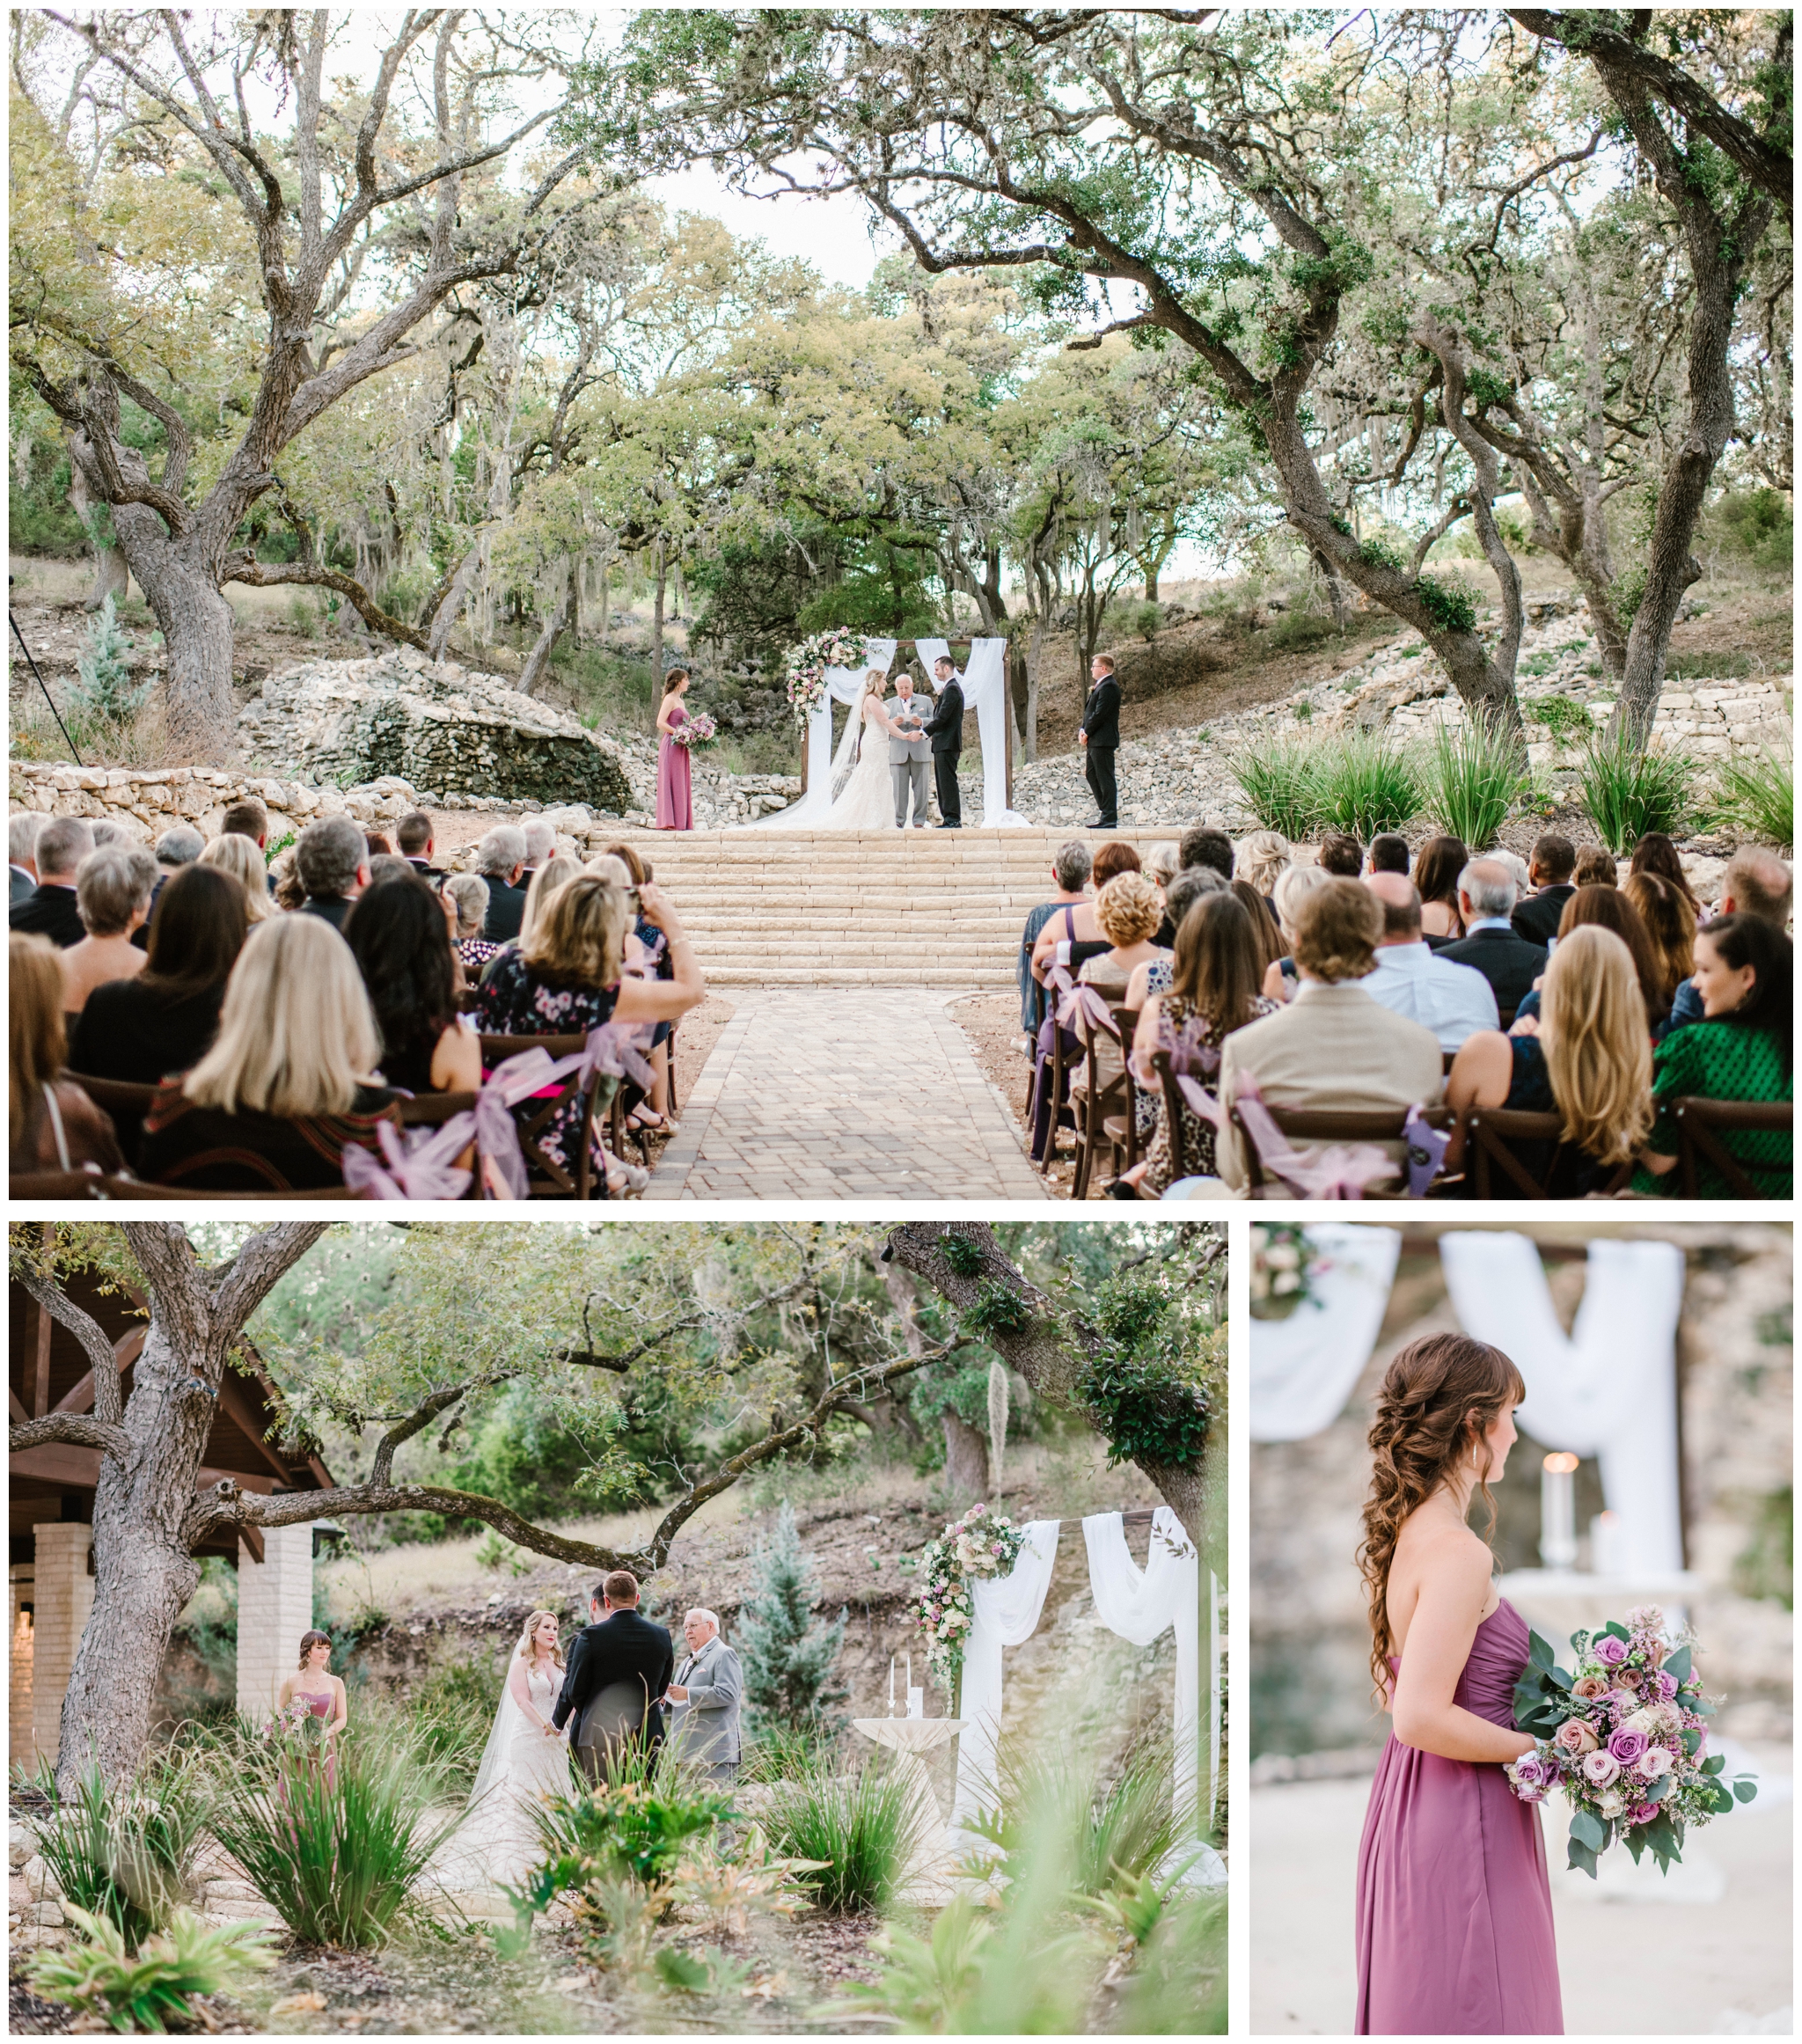 Wedding ceremony at Hayes Hollow at Hidden Falls outside of Austin, Texas | Joslyn Holtfort Photography